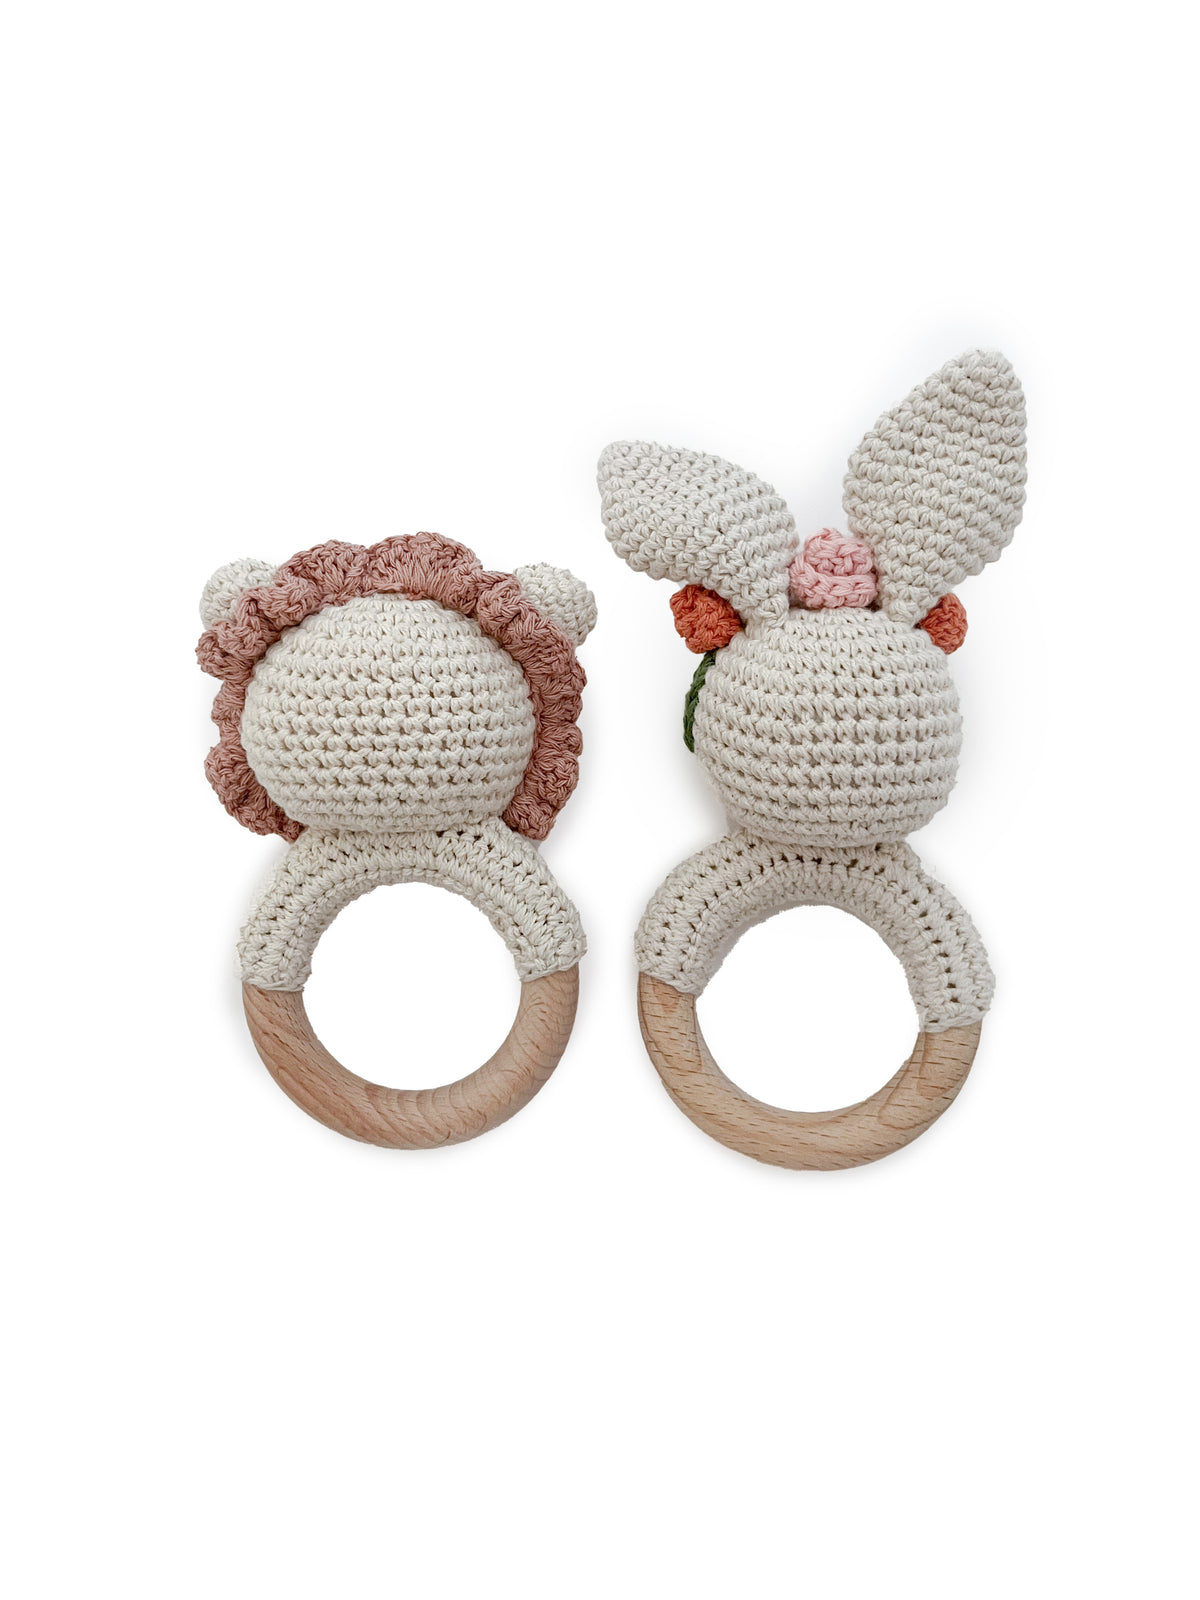 Precious Child of God Knitted Teether Rattle